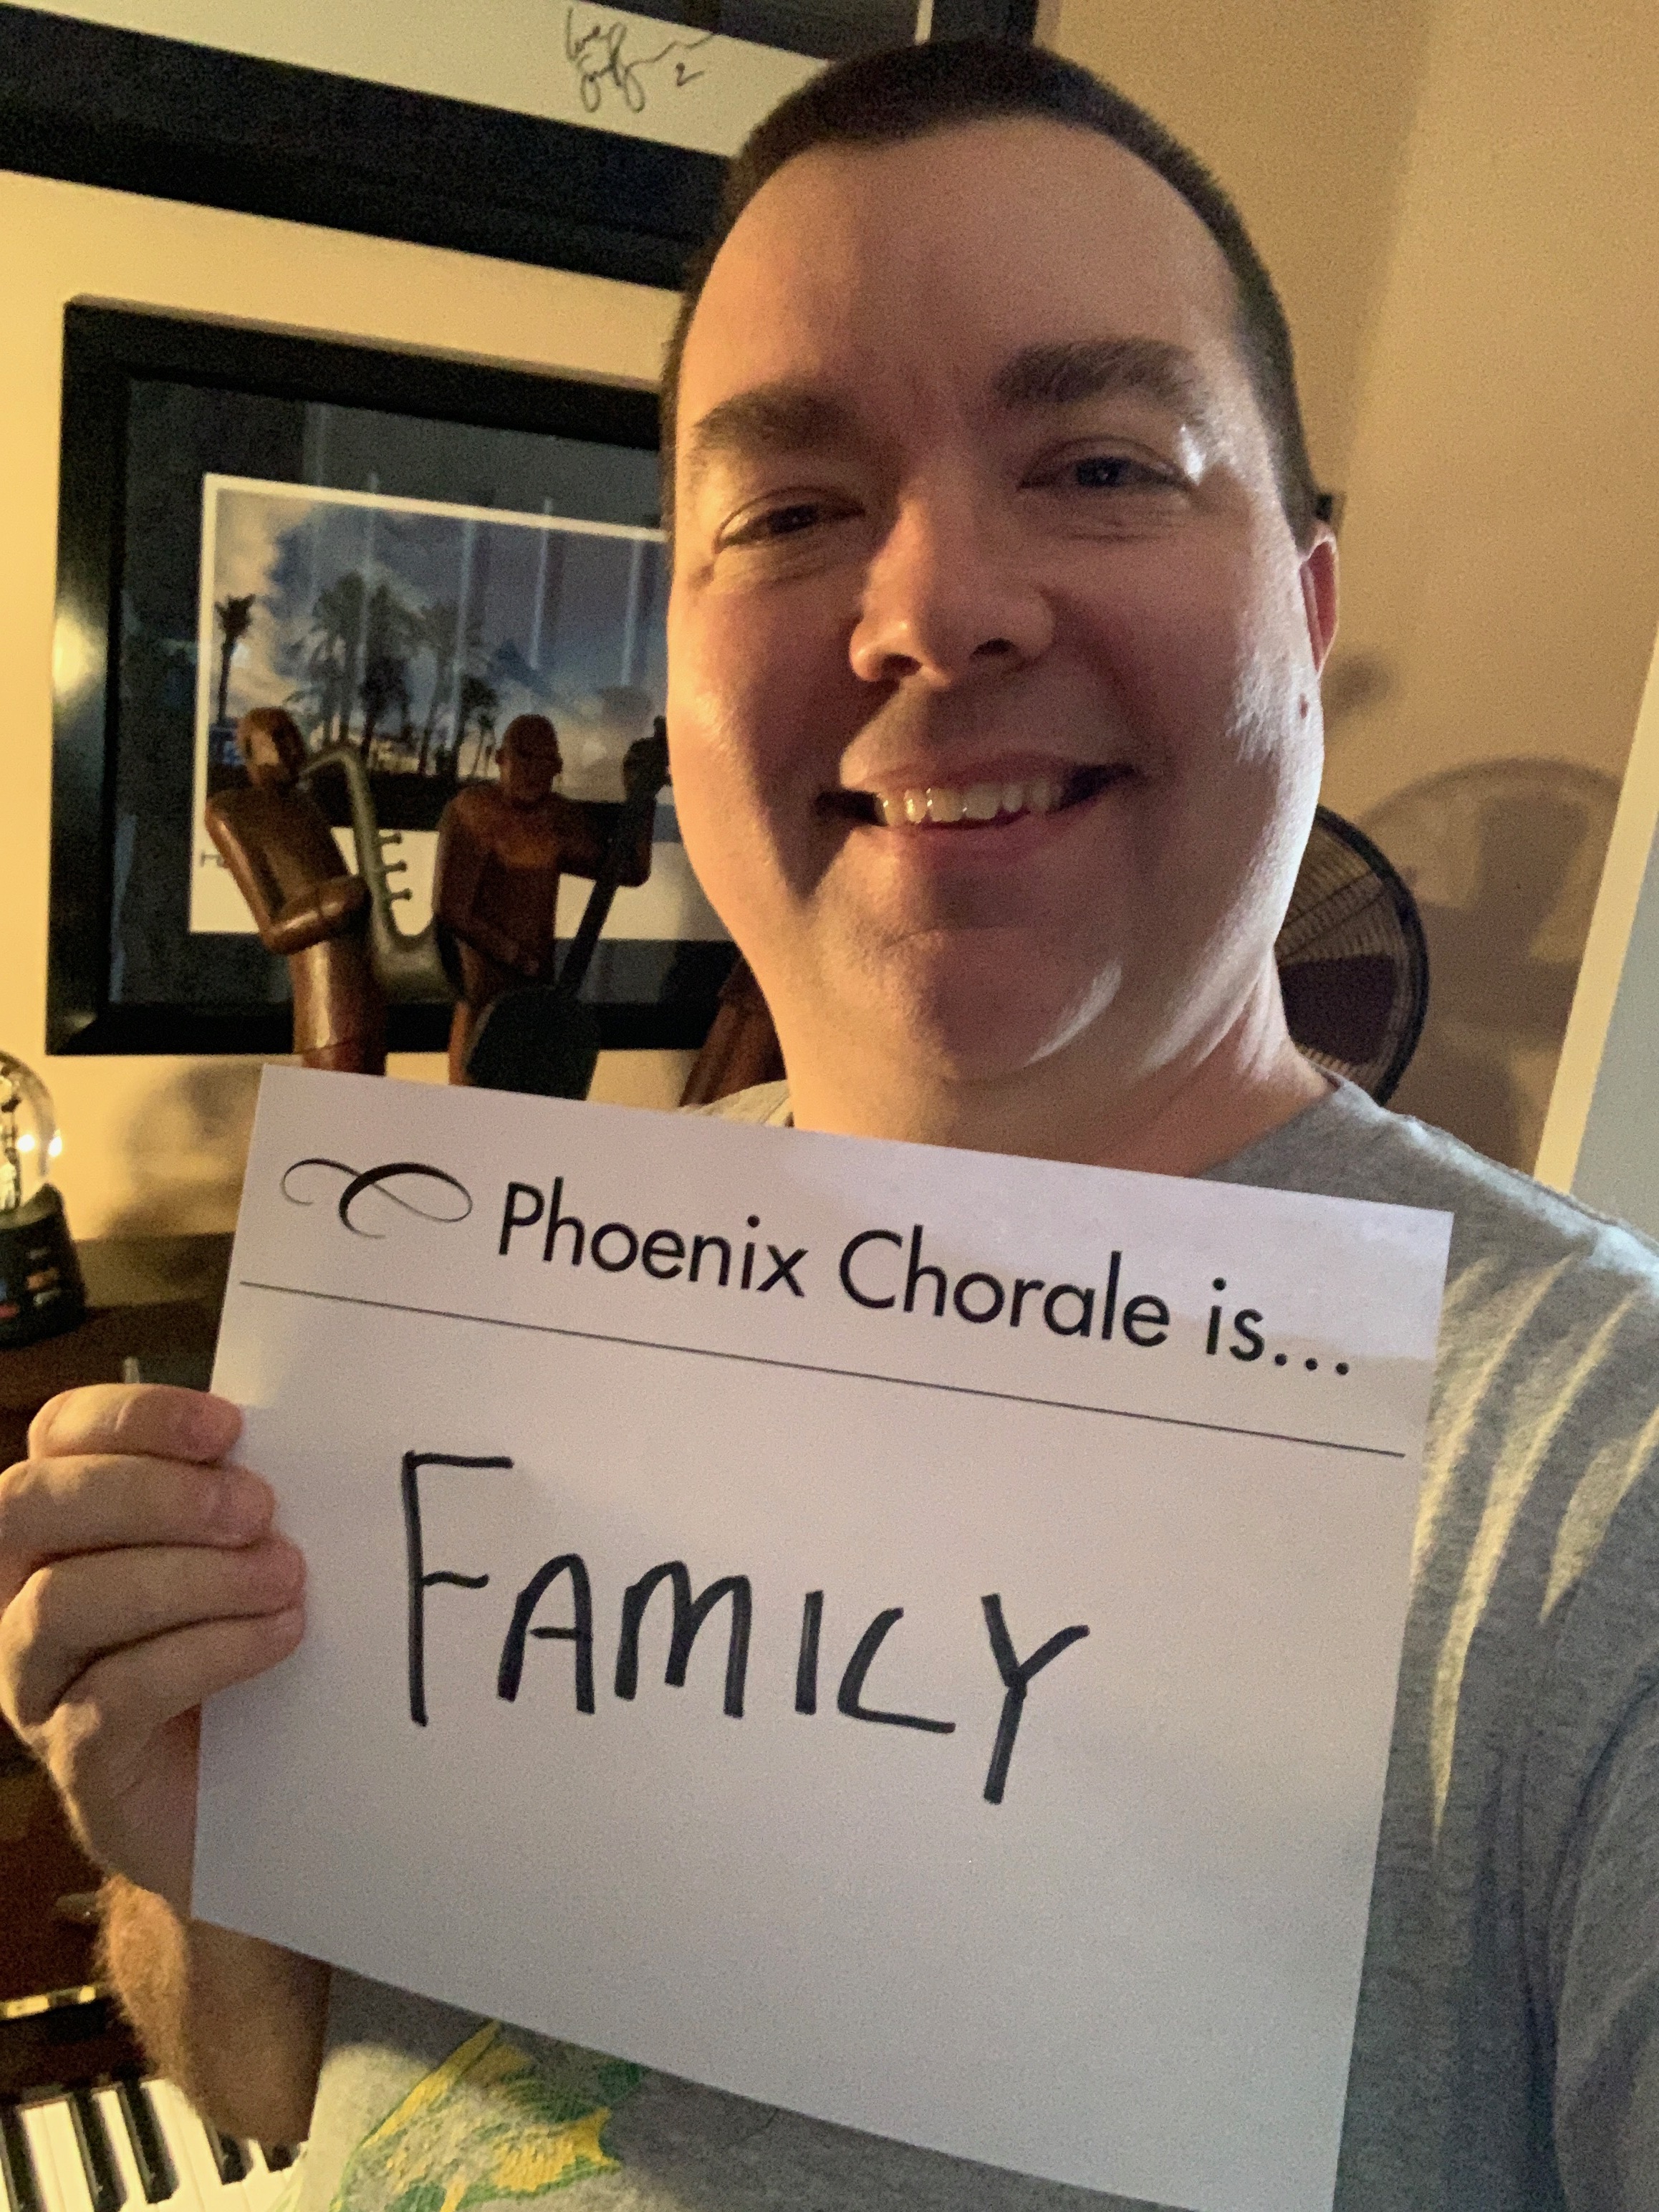 Phoenix Chorale is family